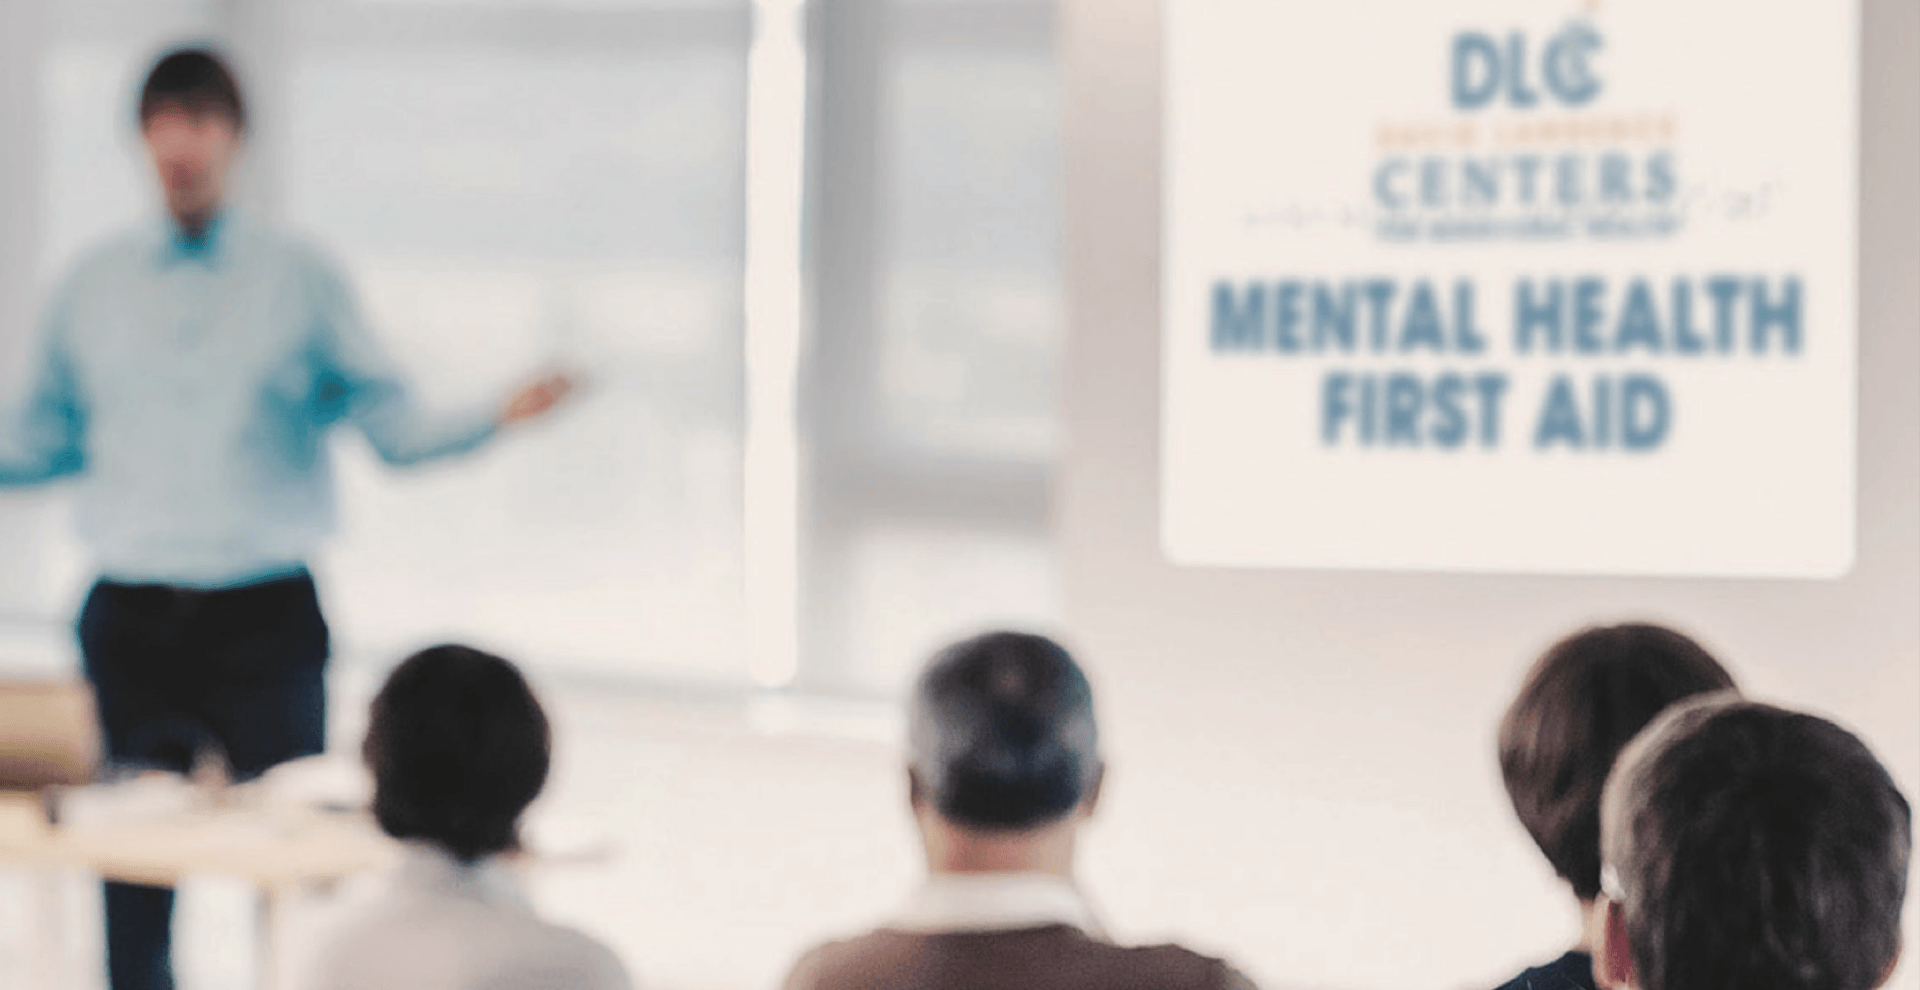 March 8th Adult Mental Health First Aid Training